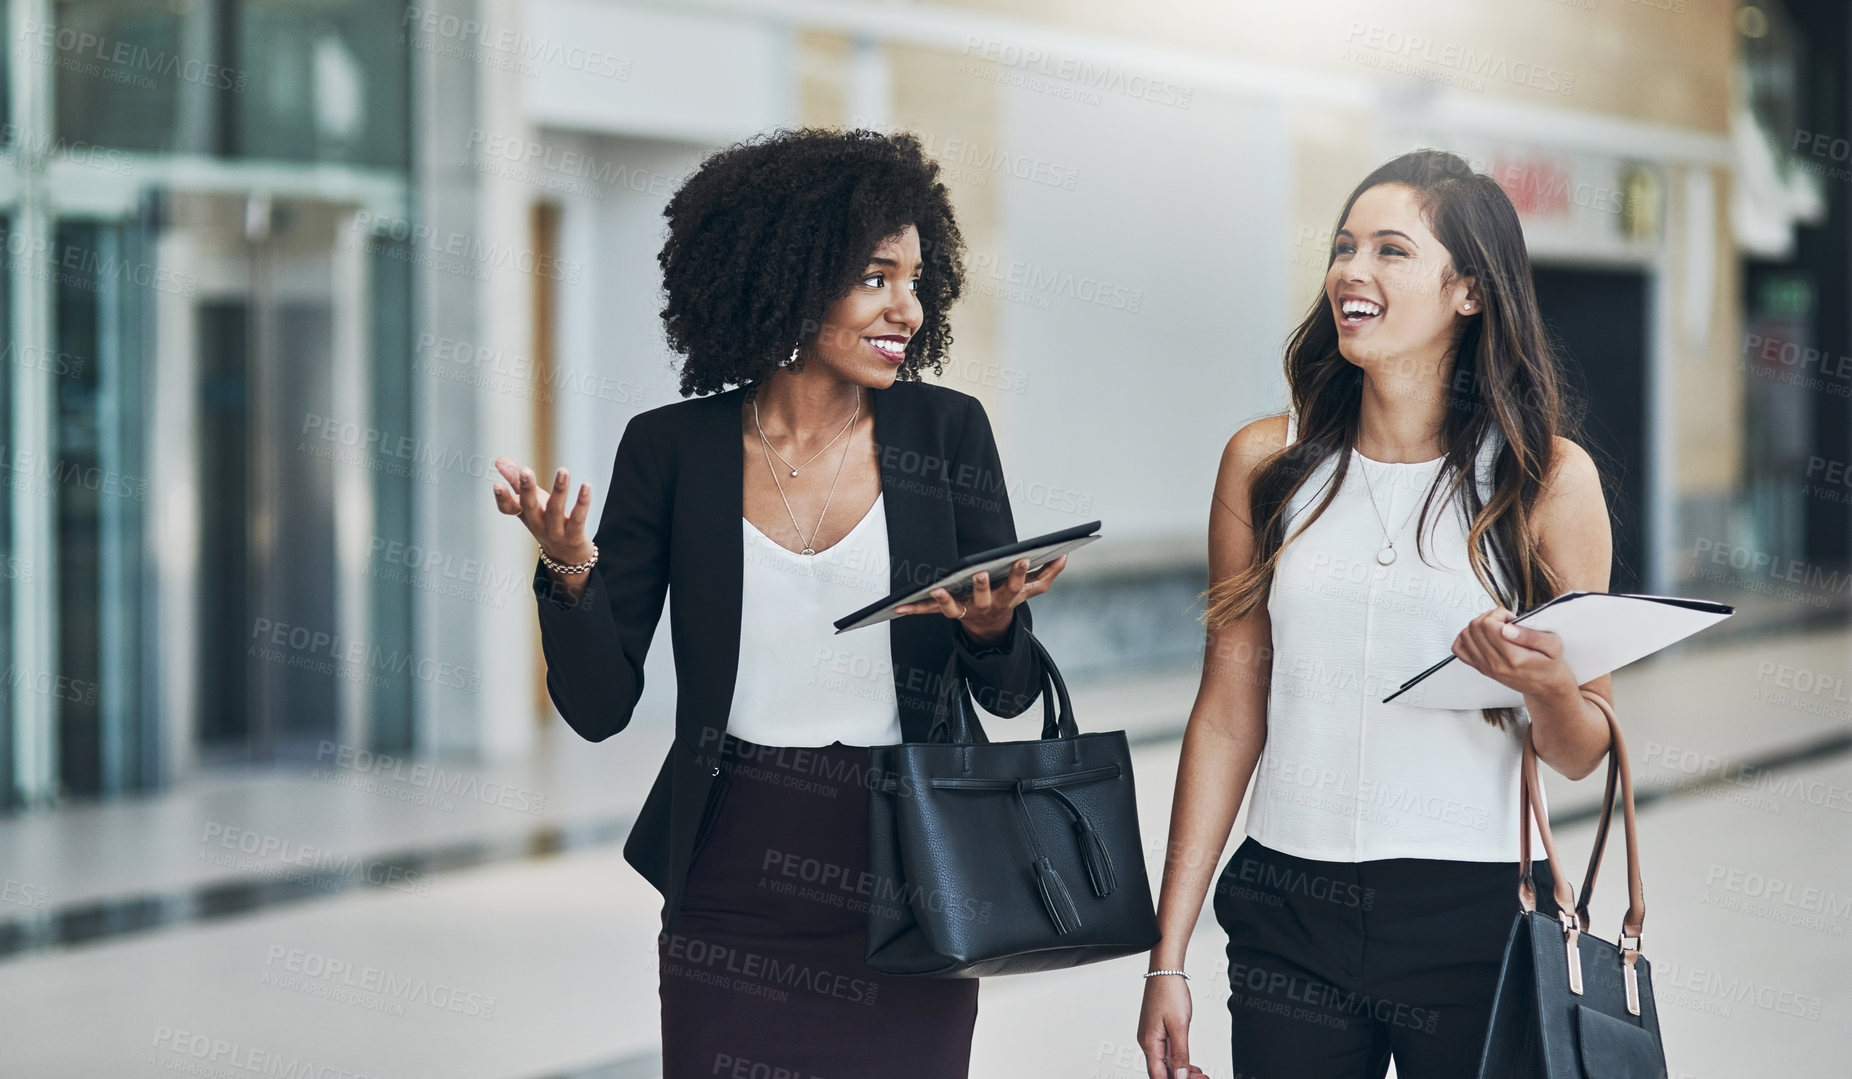 Buy stock photo Cropped shot of two young businesswomen walking together while holding digital tablets at work during the day